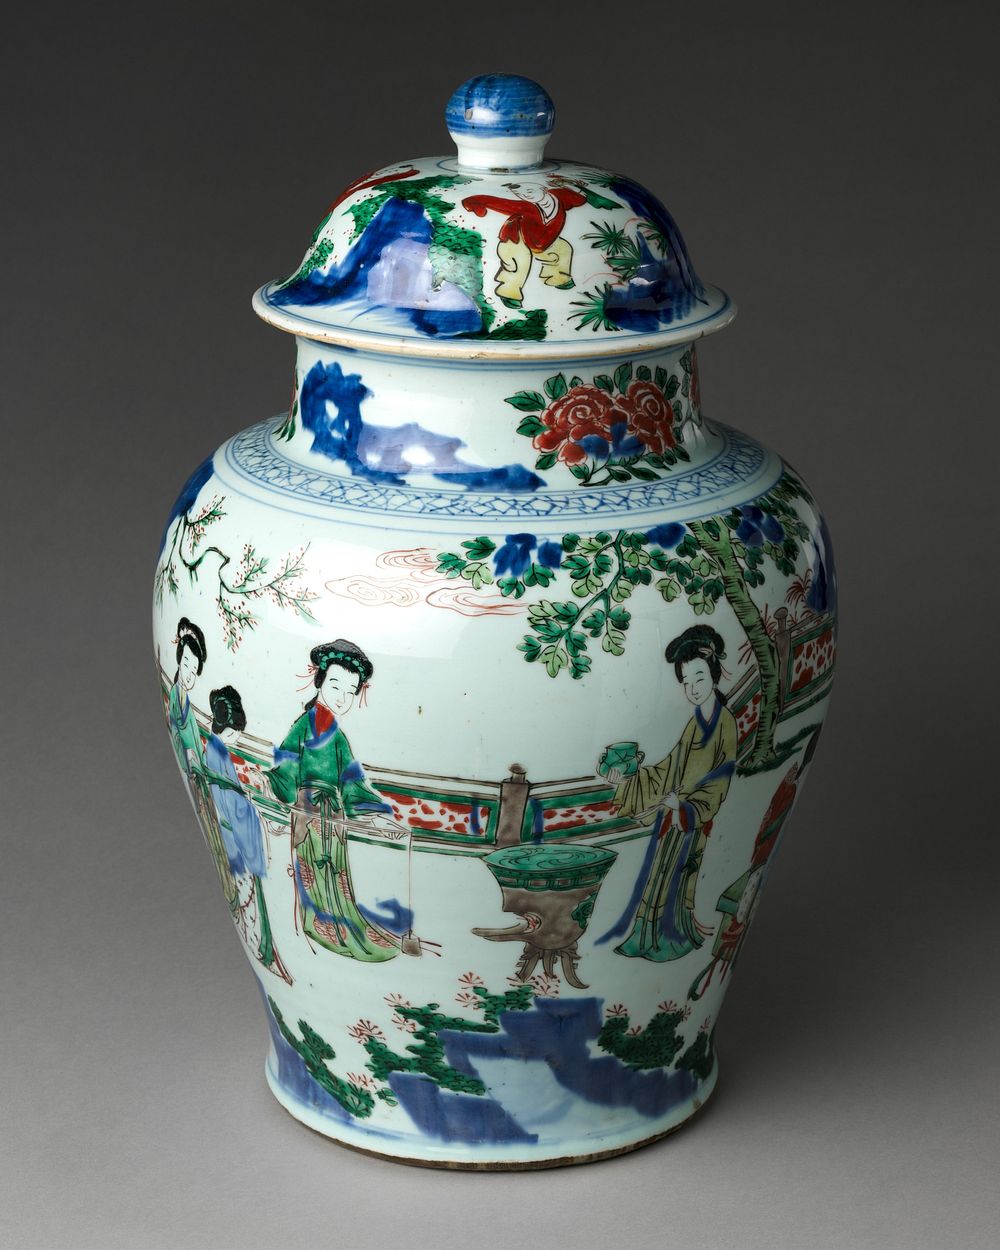 Jar with women at leisure